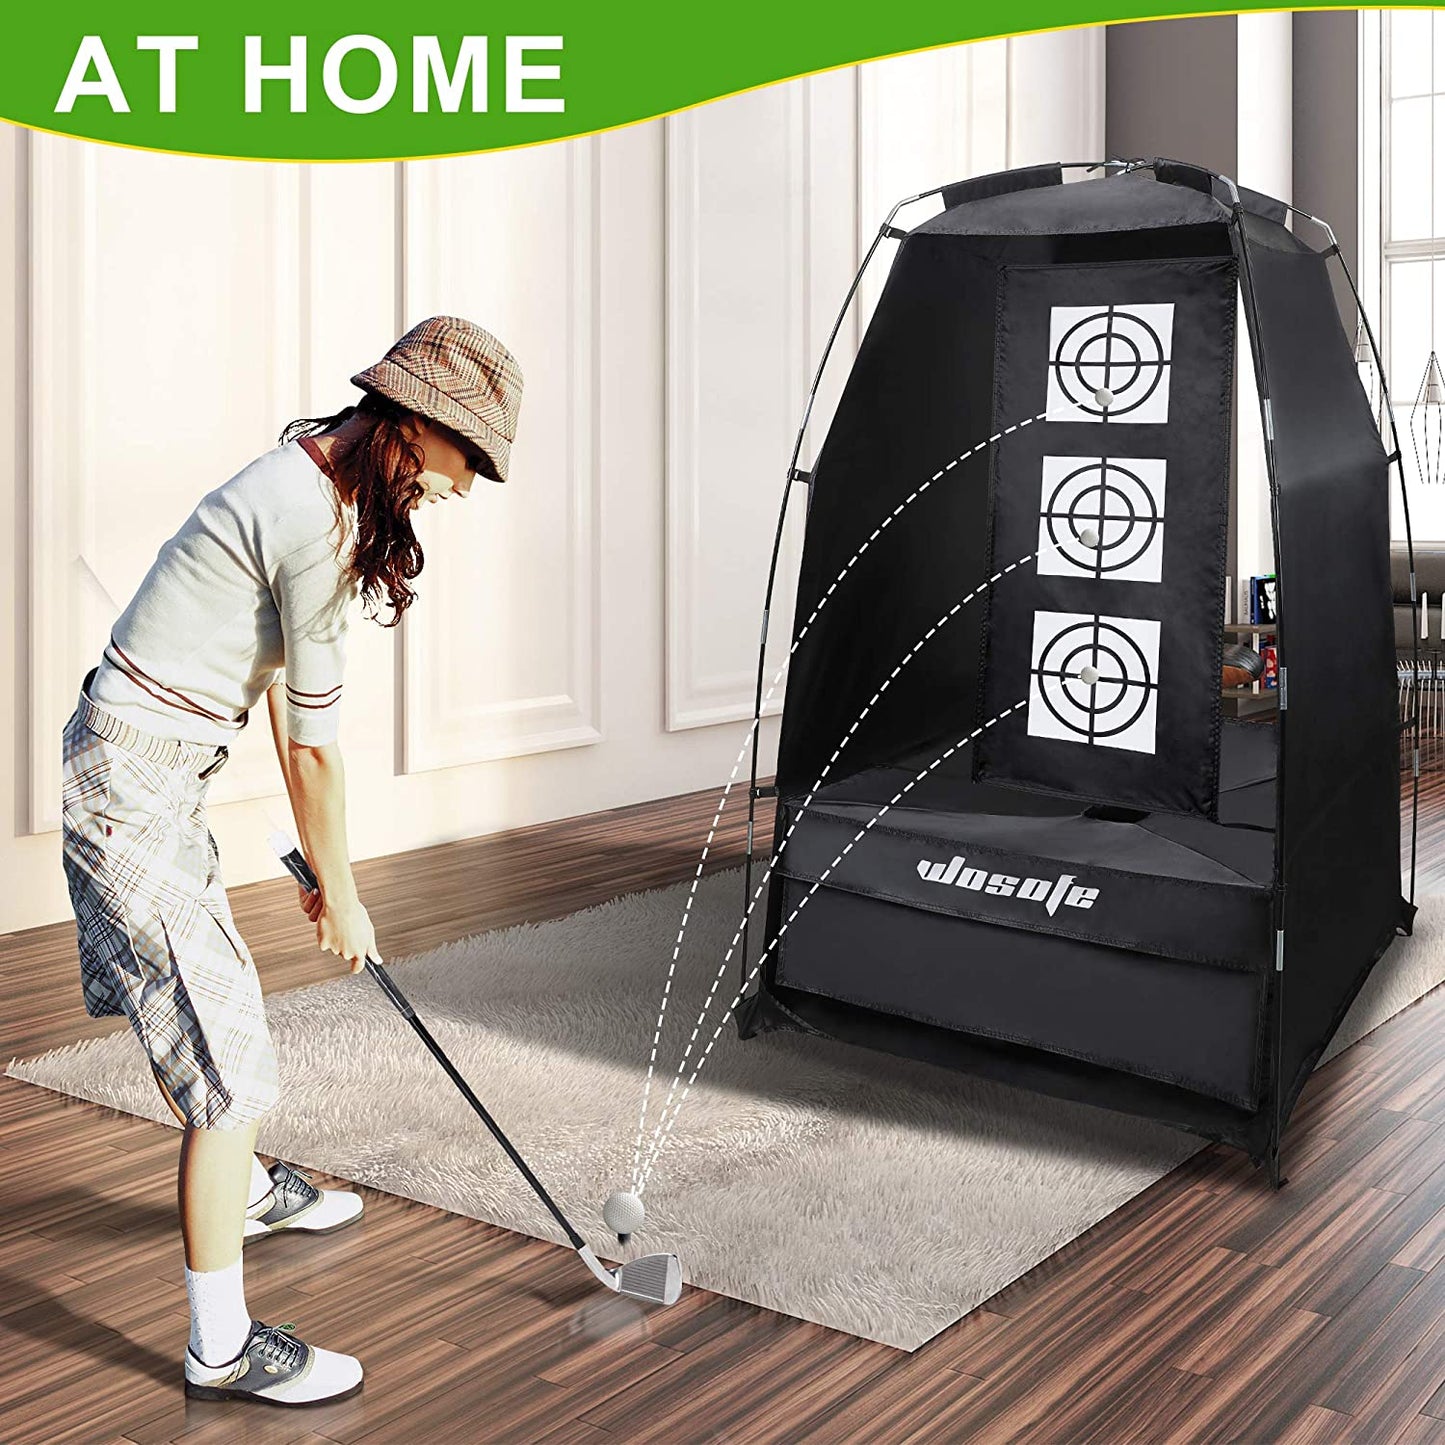 Wosofe golf practice driving the batting net 3.8 x 6.5 feet (about 9.1 x 16.5 meters) and cutting the ball professionally 2 targets for indoor and outdoor use in the backyard